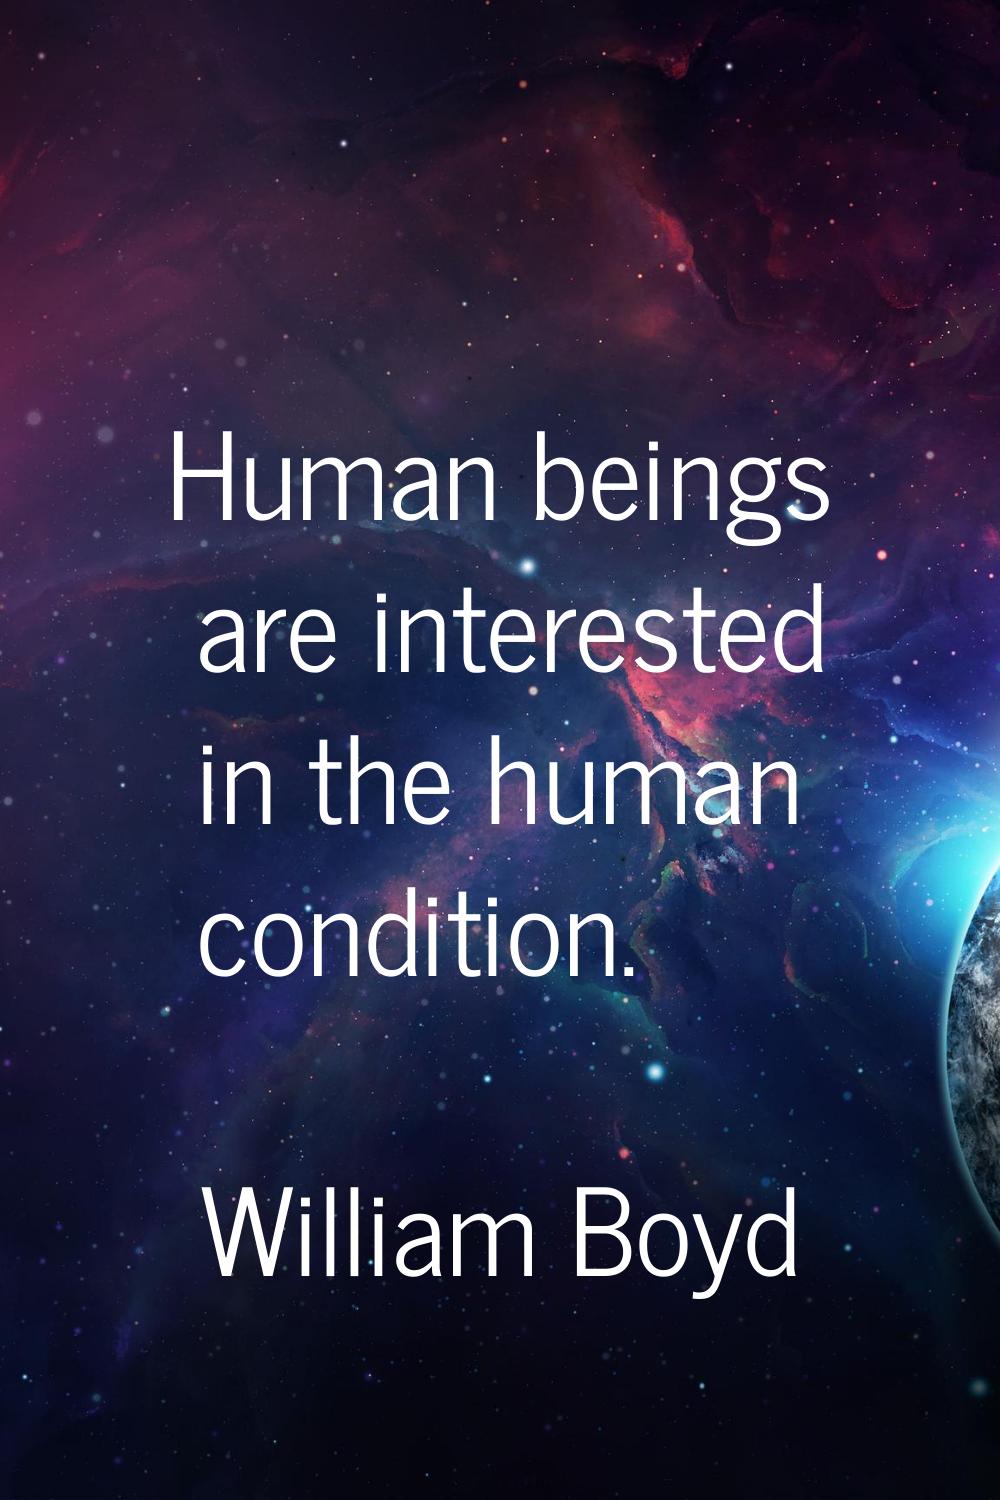 Human beings are interested in the human condition.